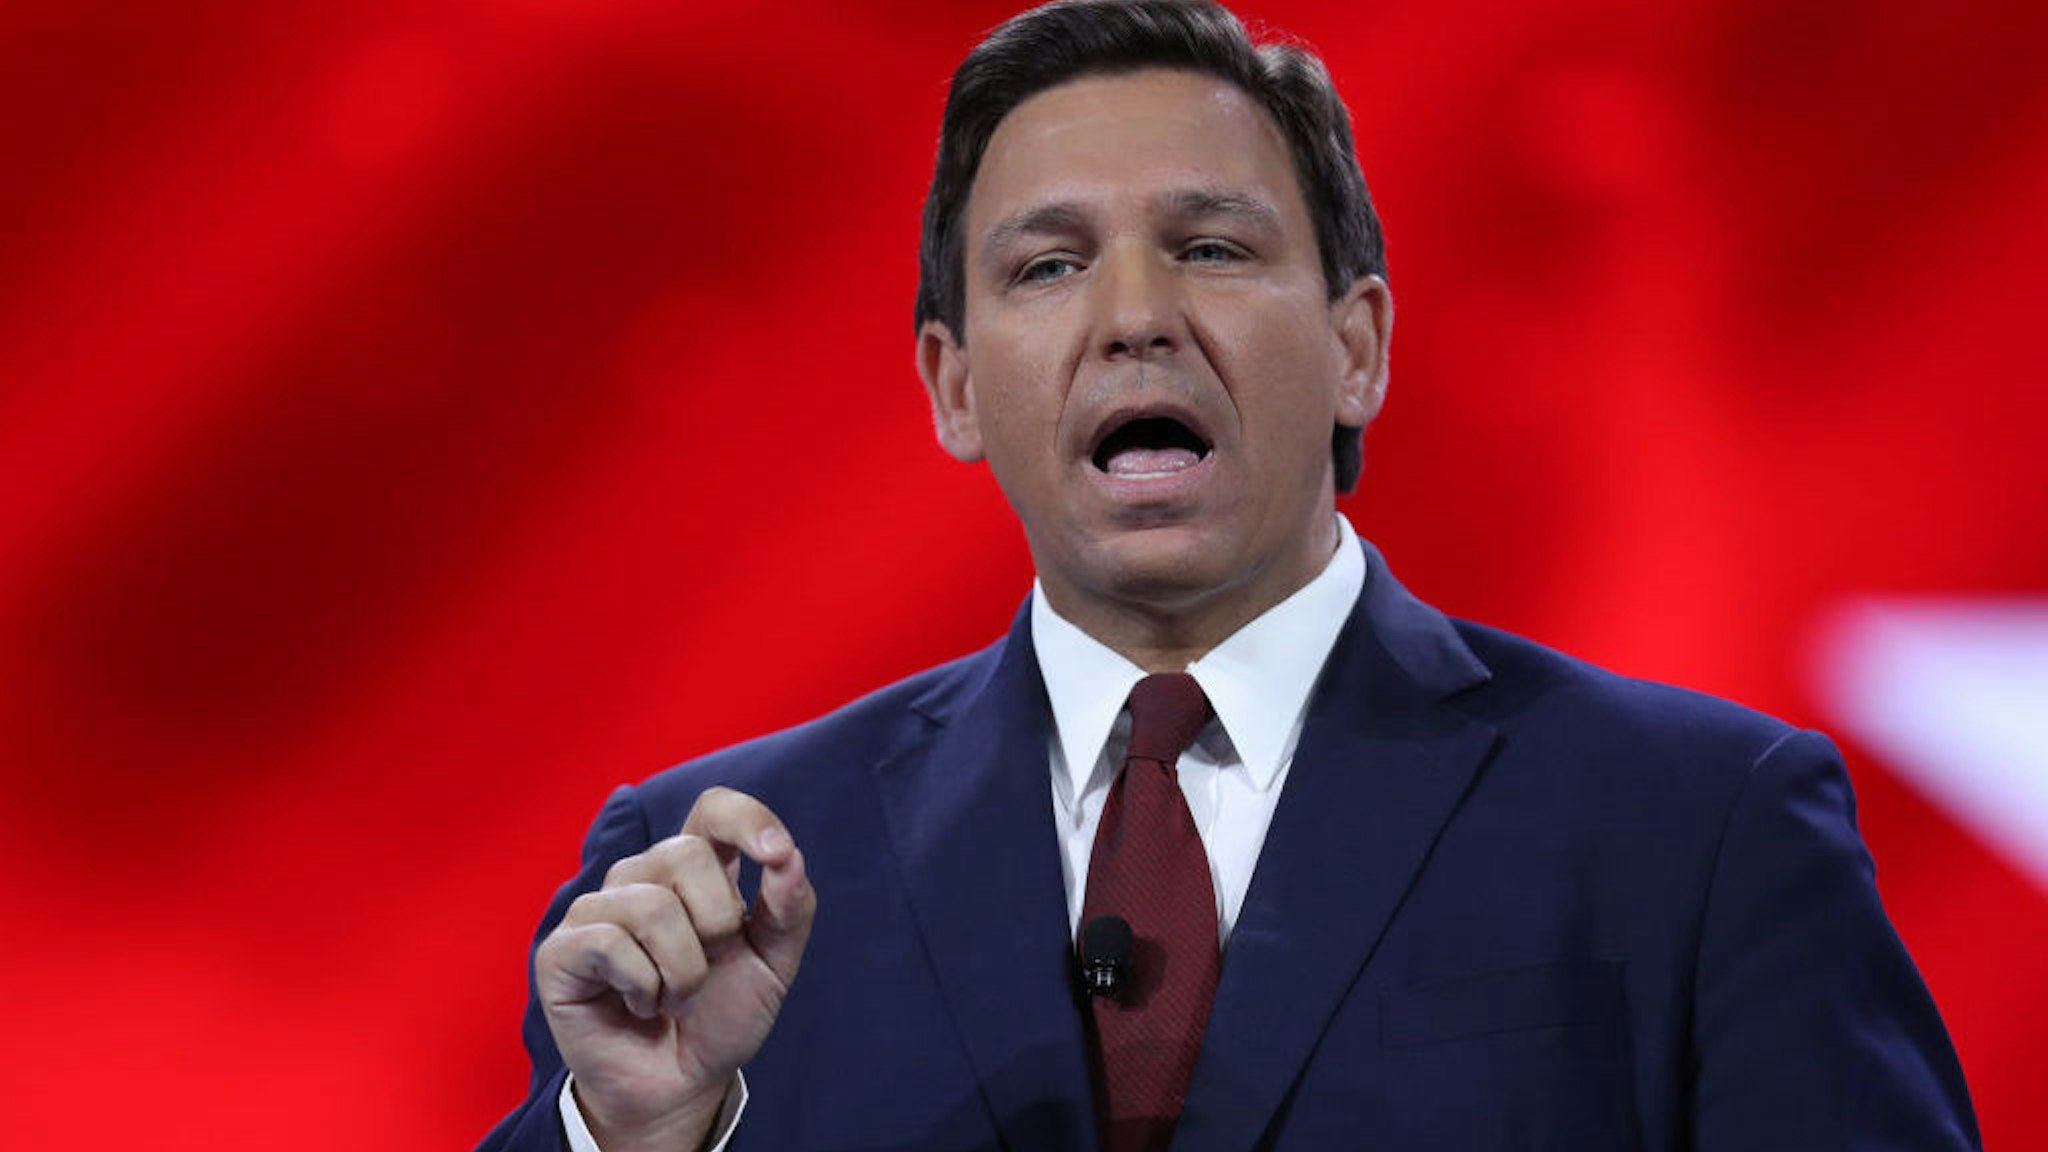 ORLANDO, FLORIDA - FEBRUARY 26: Florida Gov. Ron DeSantis speaks at the opening of the Conservative Political Action Conference at the Hyatt Regency on February 26, 2021 in Orlando, Florida. Begun in 1974, CPAC brings together conservative organizations, activists and world leaders to discuss issues important to them. (Photo by Joe Raedle/Getty Images)